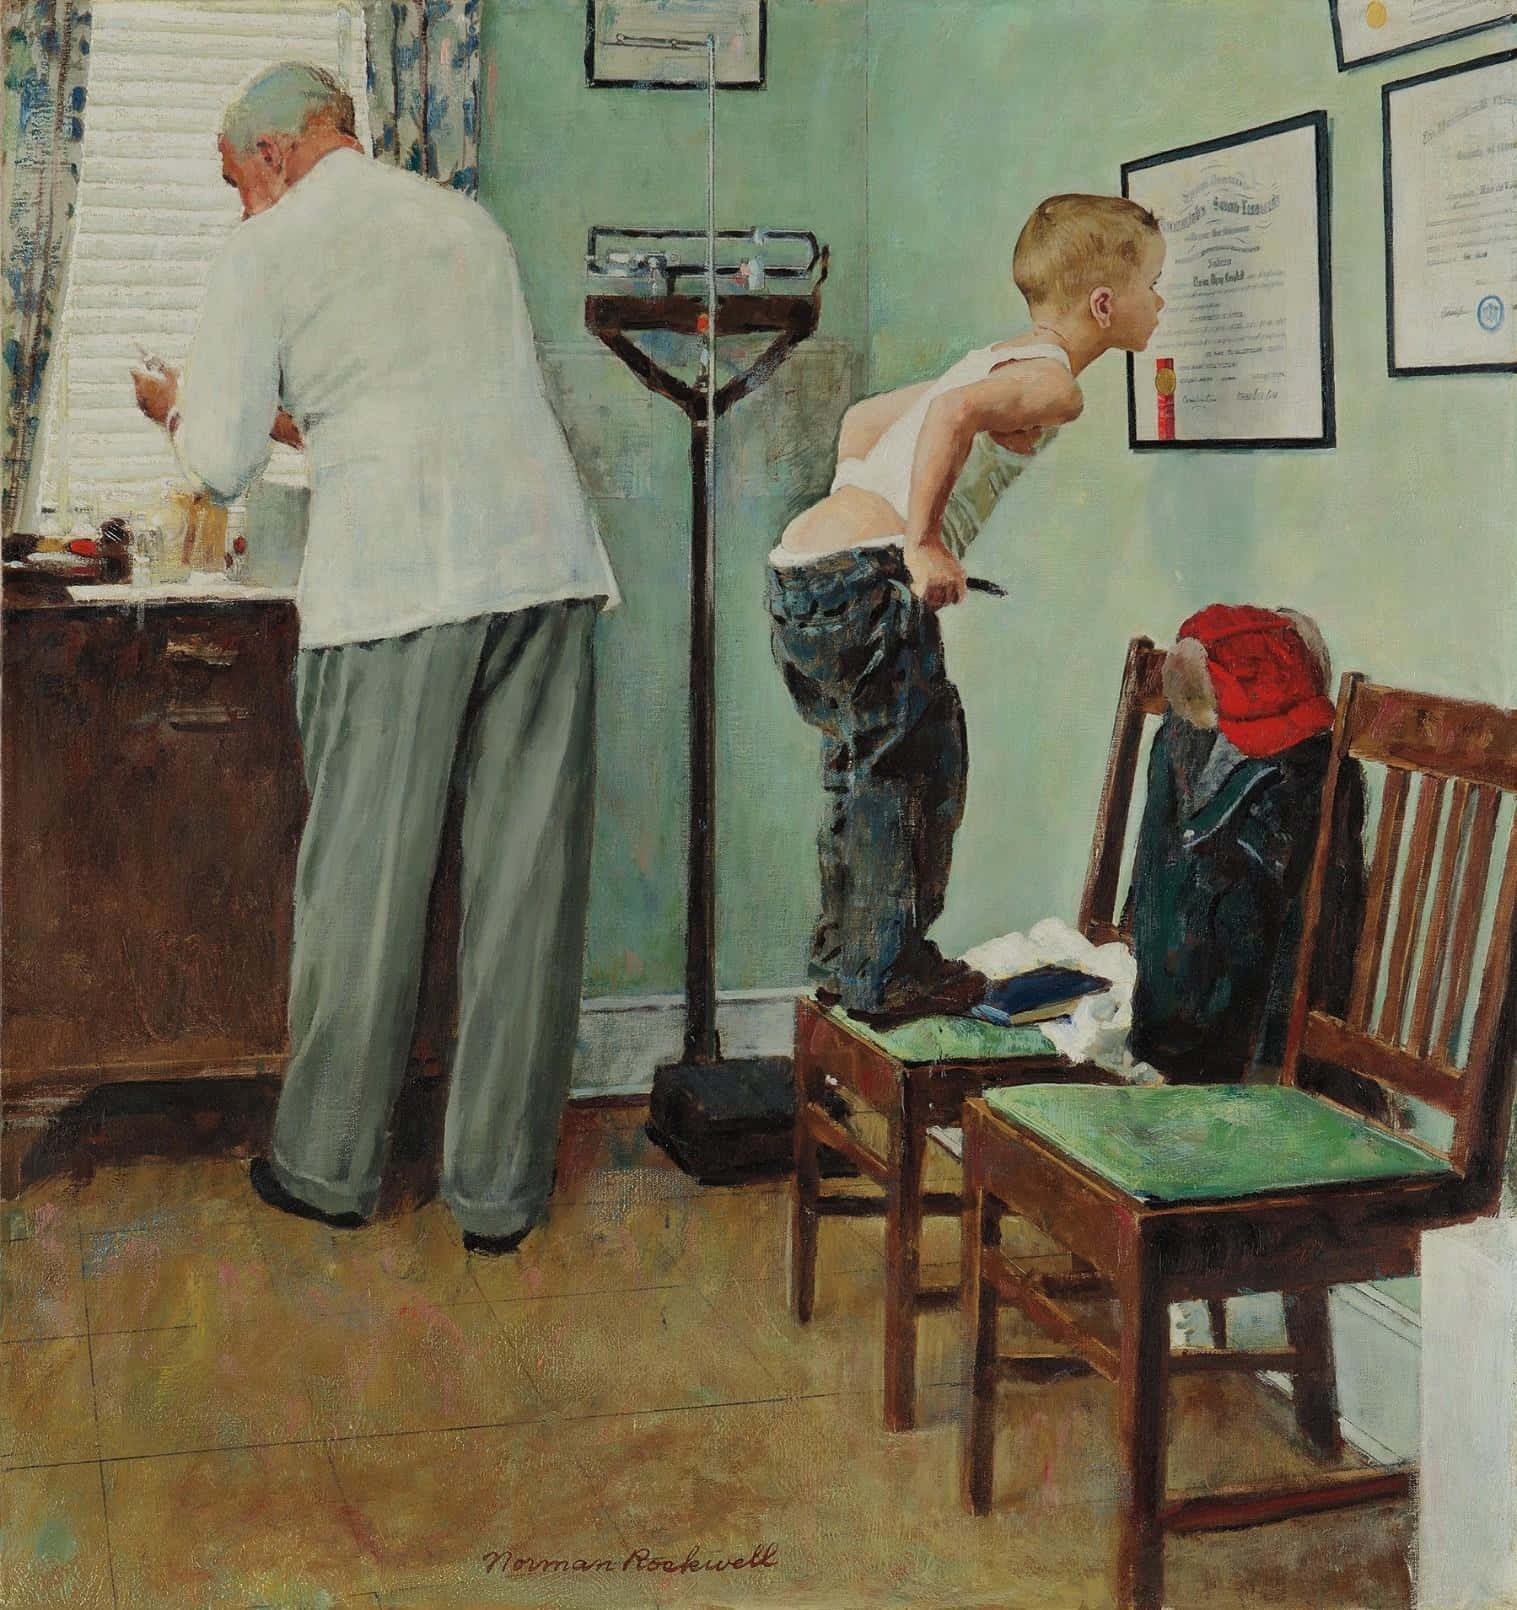 Norman Rockwell's Illustration for "Girl Dreaming of a Solder Boy"